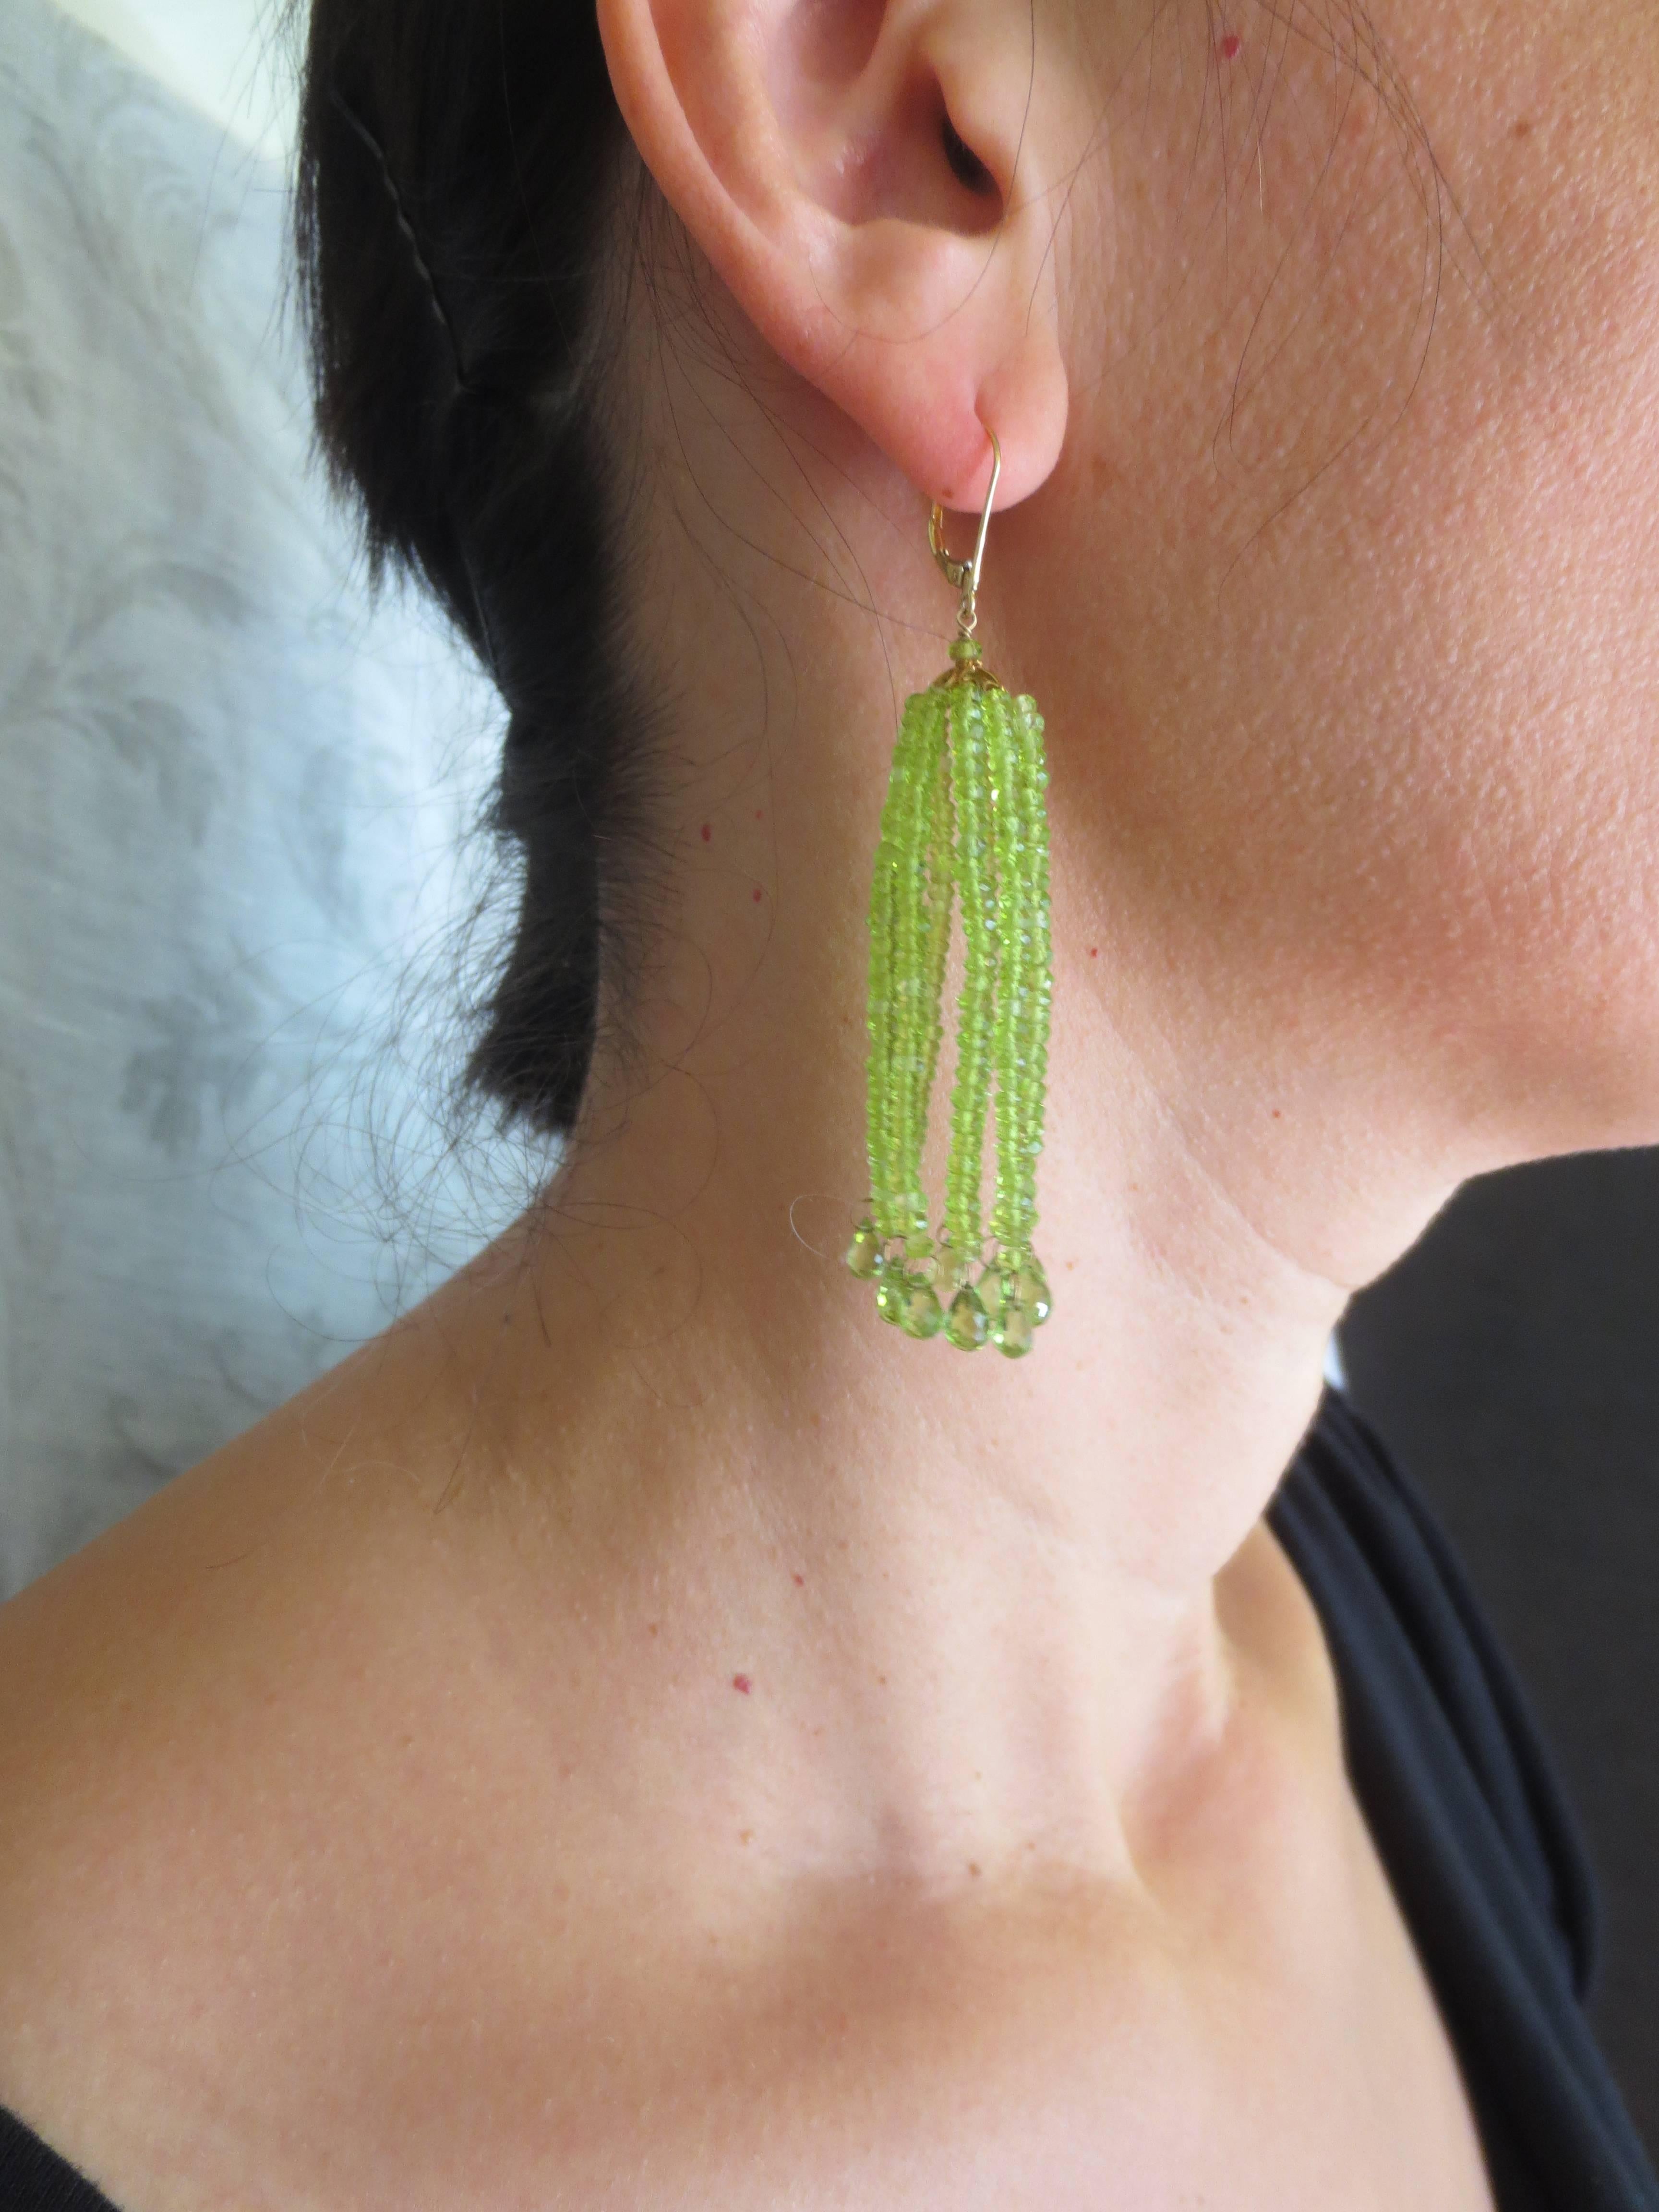 These beautifully crafted tassel earrings are made of faceted 1.5mm - 2mm peridot beads. Each string ends with fine peridot briolettes, hung by 18K gold hoops, offering a light and lush feel. The tassel hangs from an 18k filigree gold cup. Ear wires